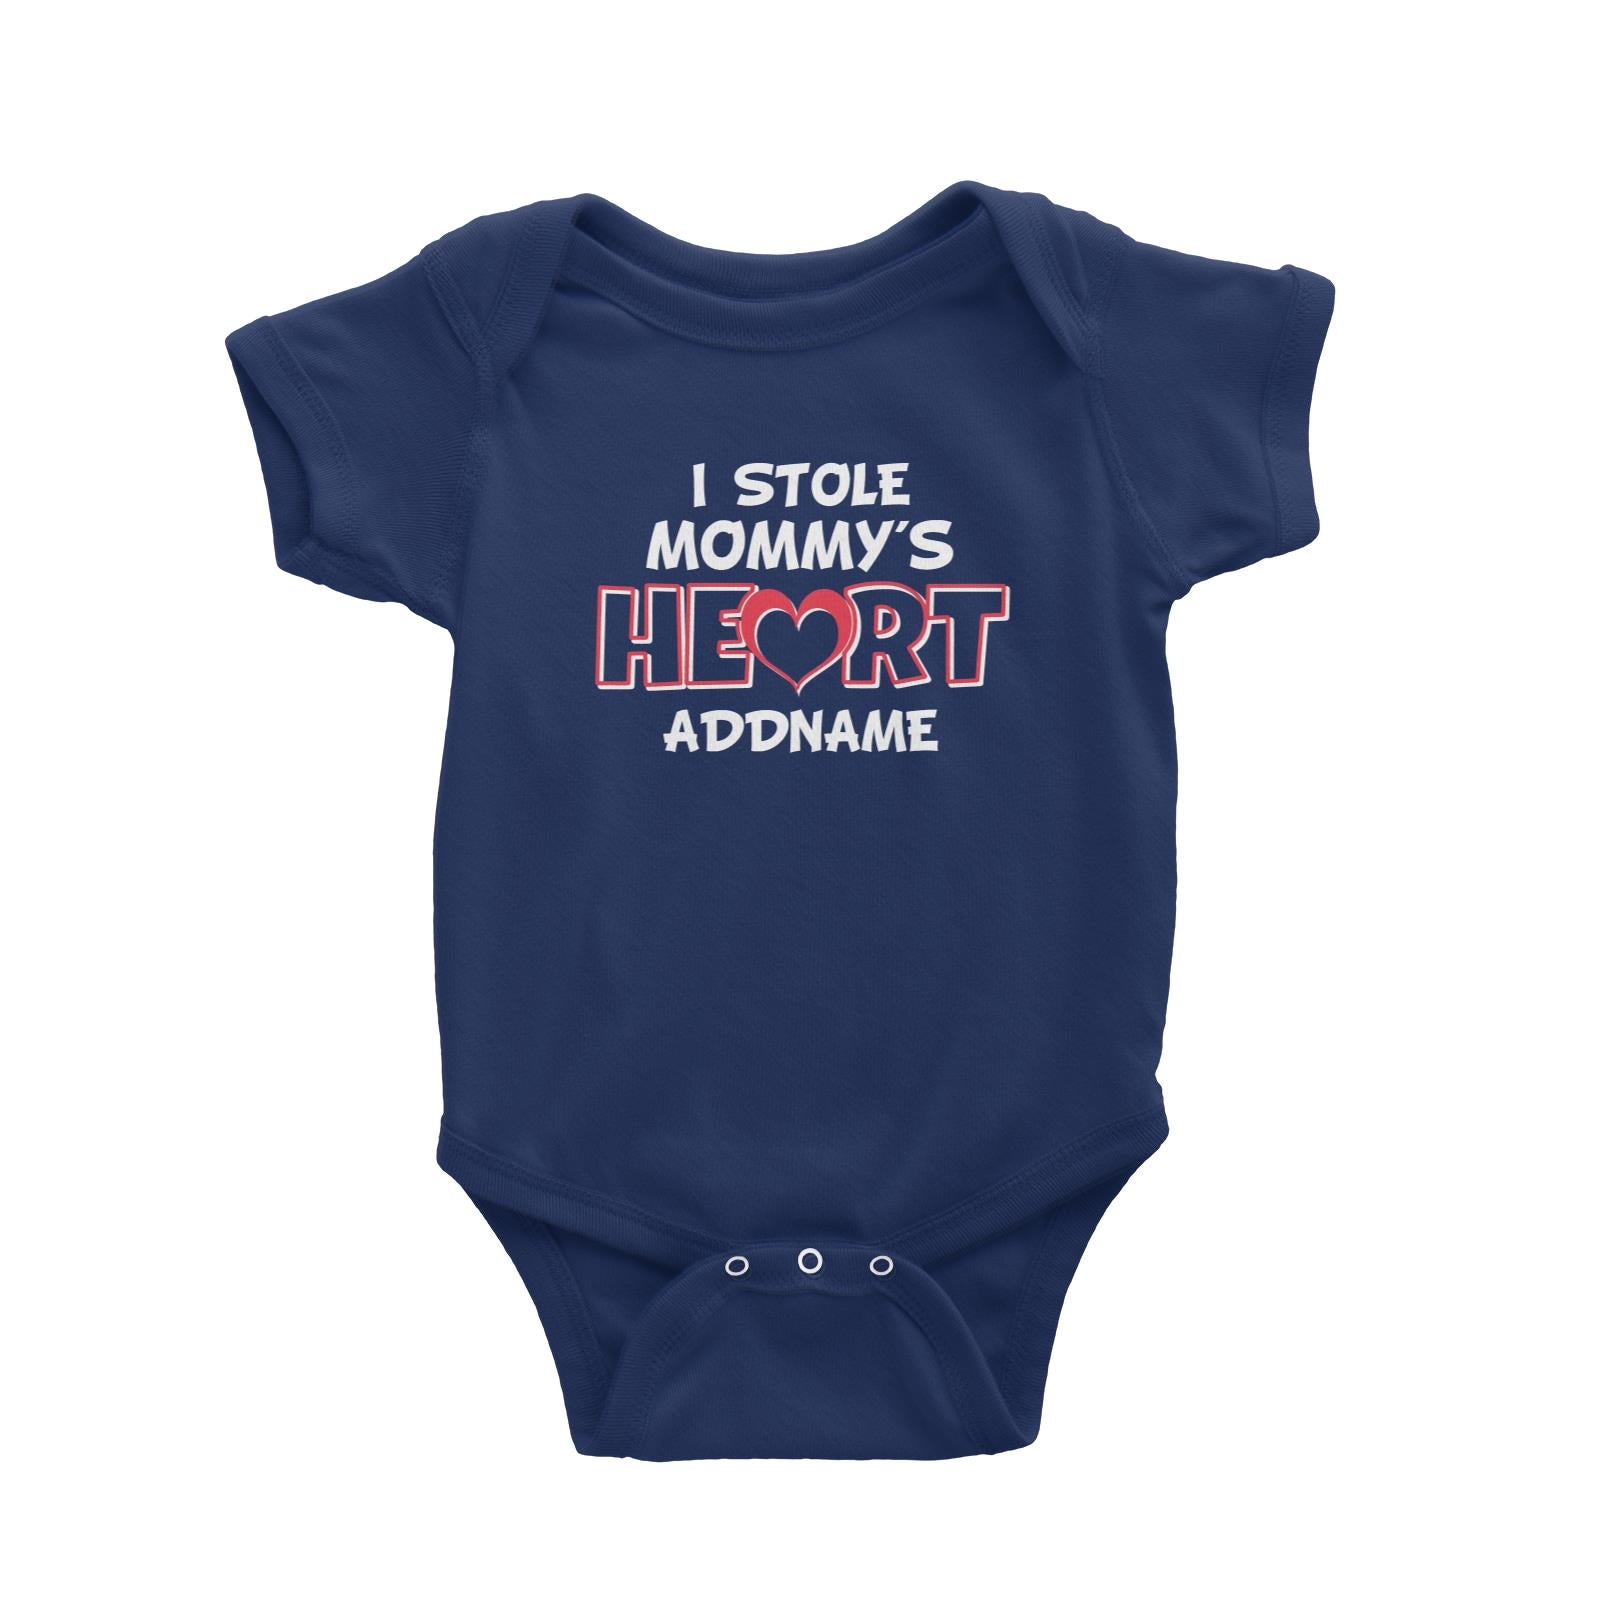 I Stole Mommys Heart Baby Romper